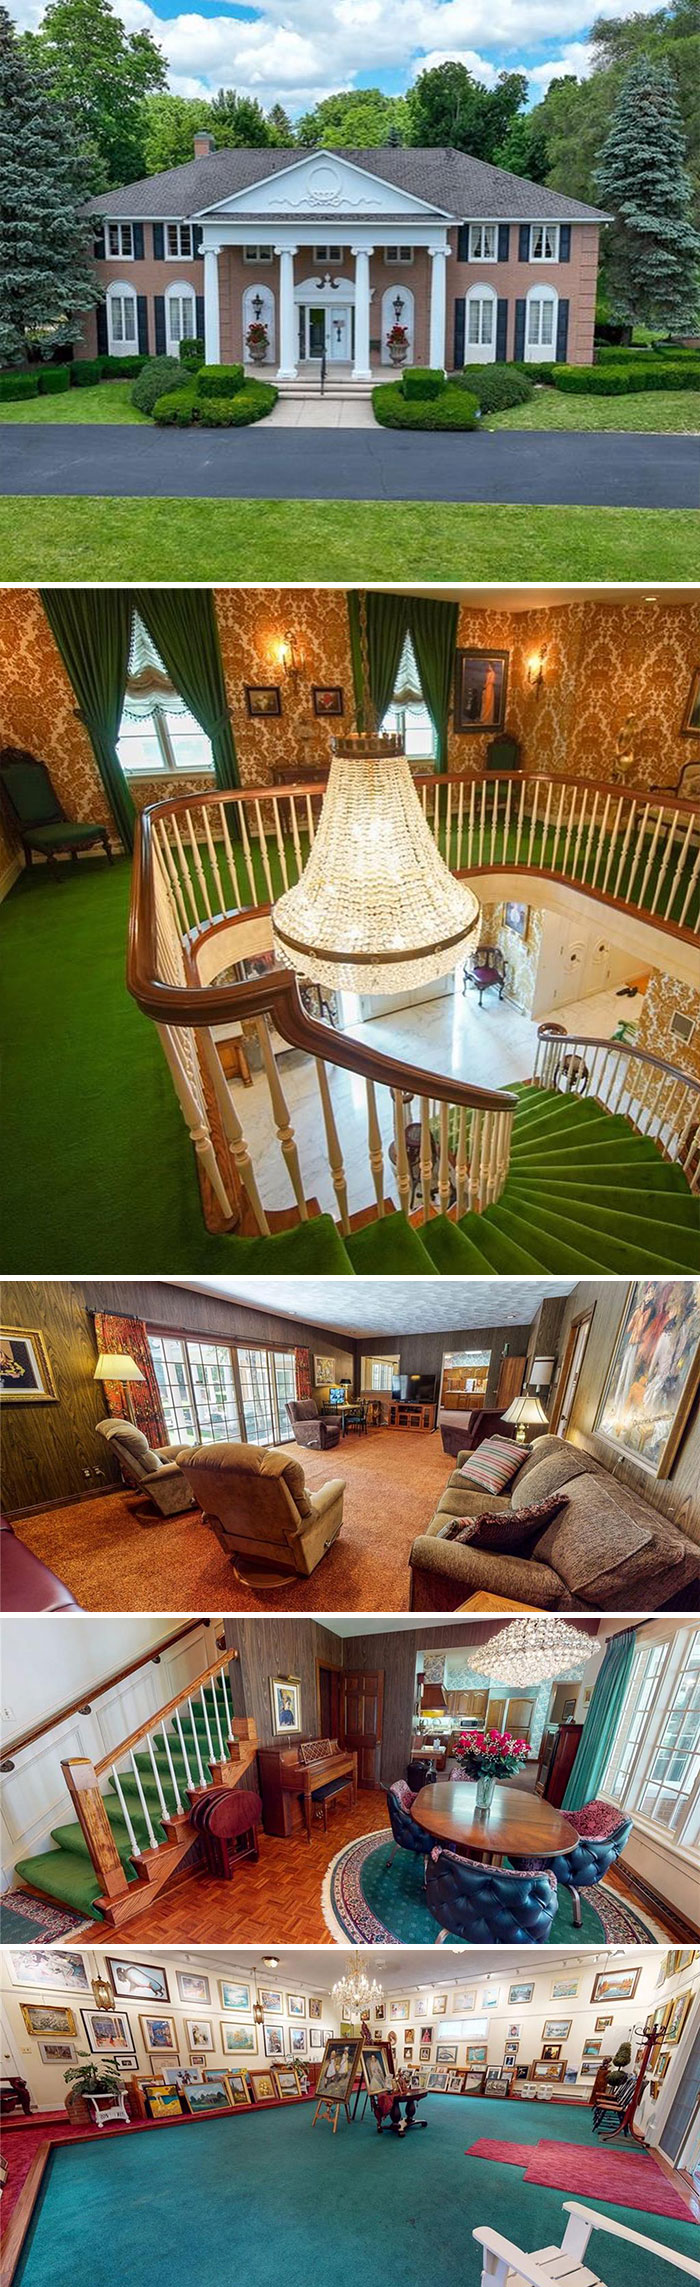 I’ve Never Said This Before But This Home Is 100% Perfect And I Wouldn’t Touch A Single Thing. Follow @zillowgonewild For More Wild Homes Every Day!! $1,600,000. 4 Bd, 6 Ba. 8,095 Sq Ft. 6 Acres